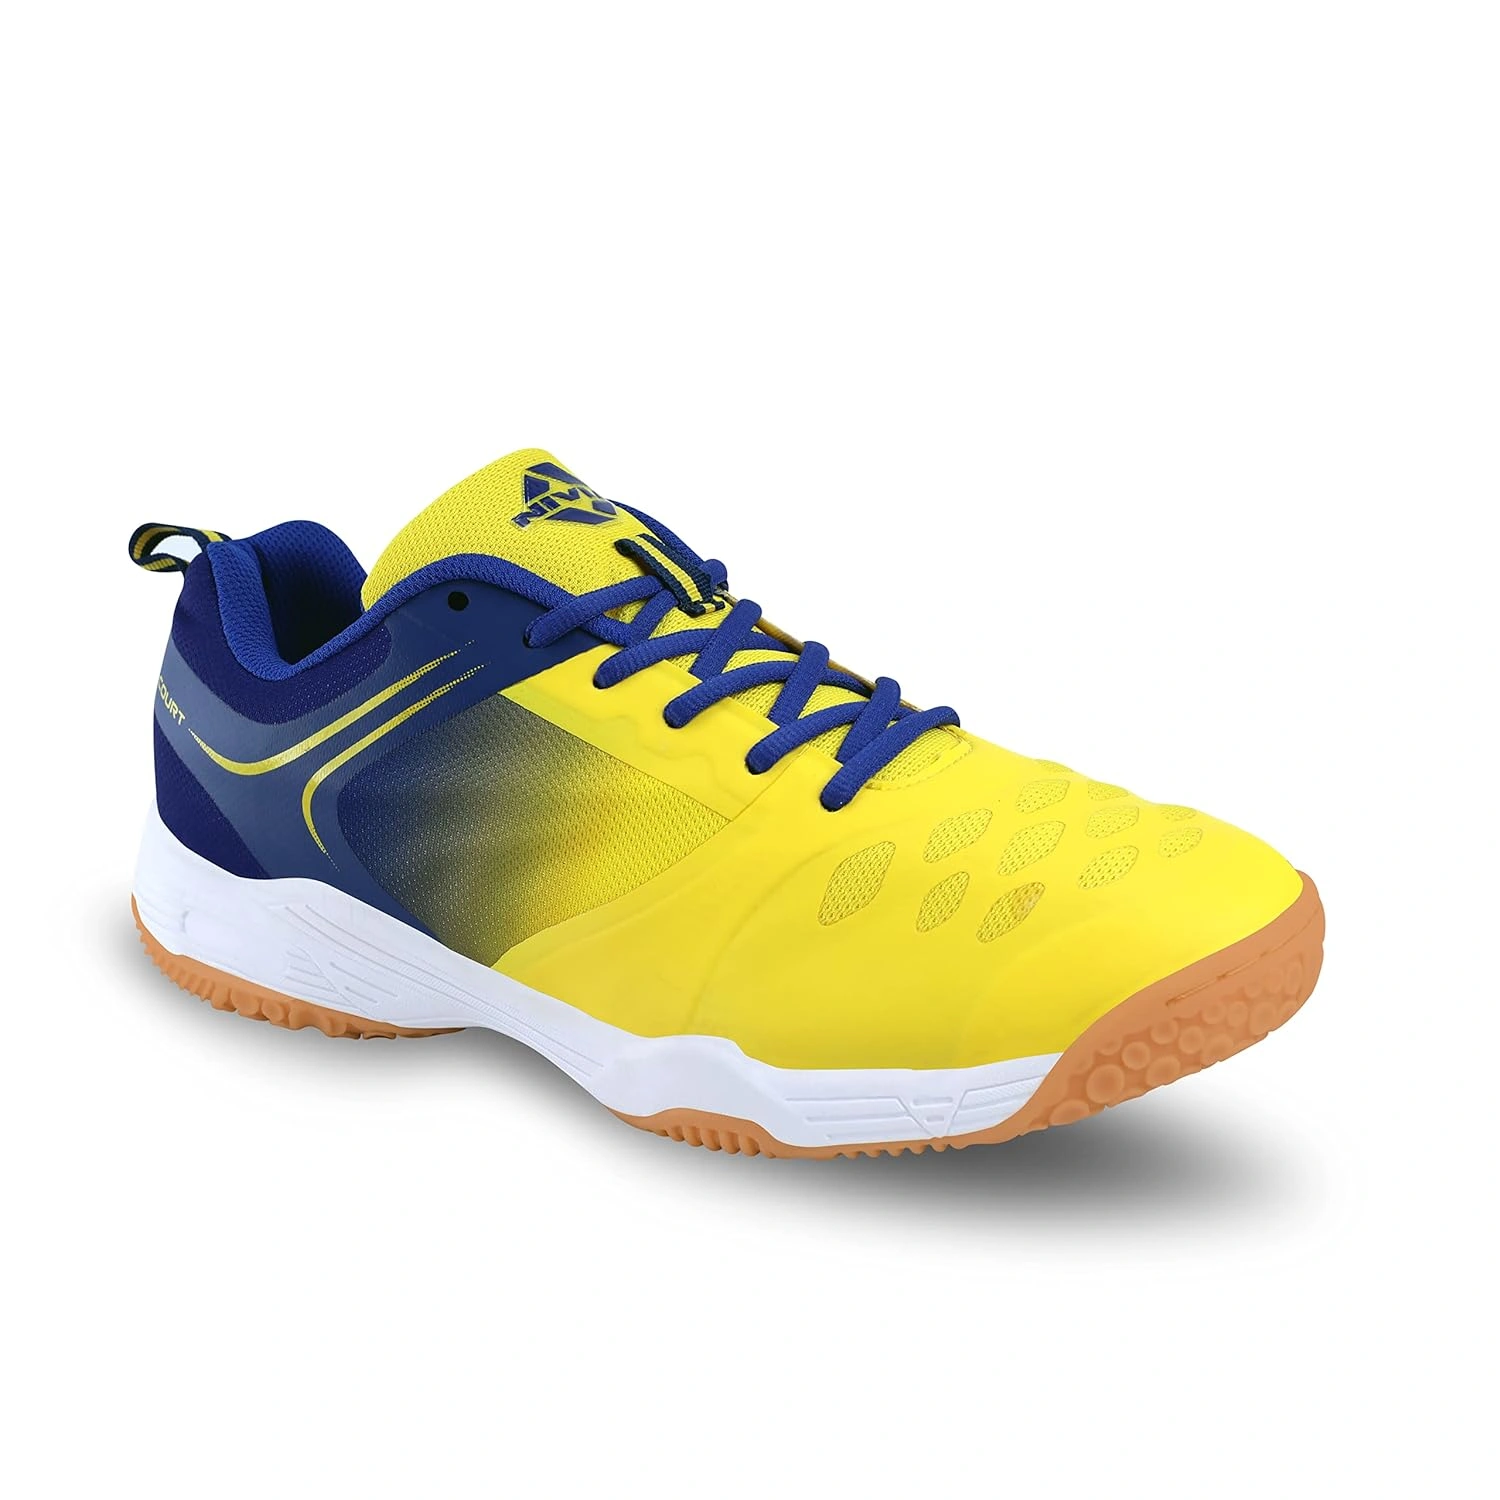 Nivia Hy-court 2.0 Badminton Shoes For Mens-YELL/ BLUE-6-1